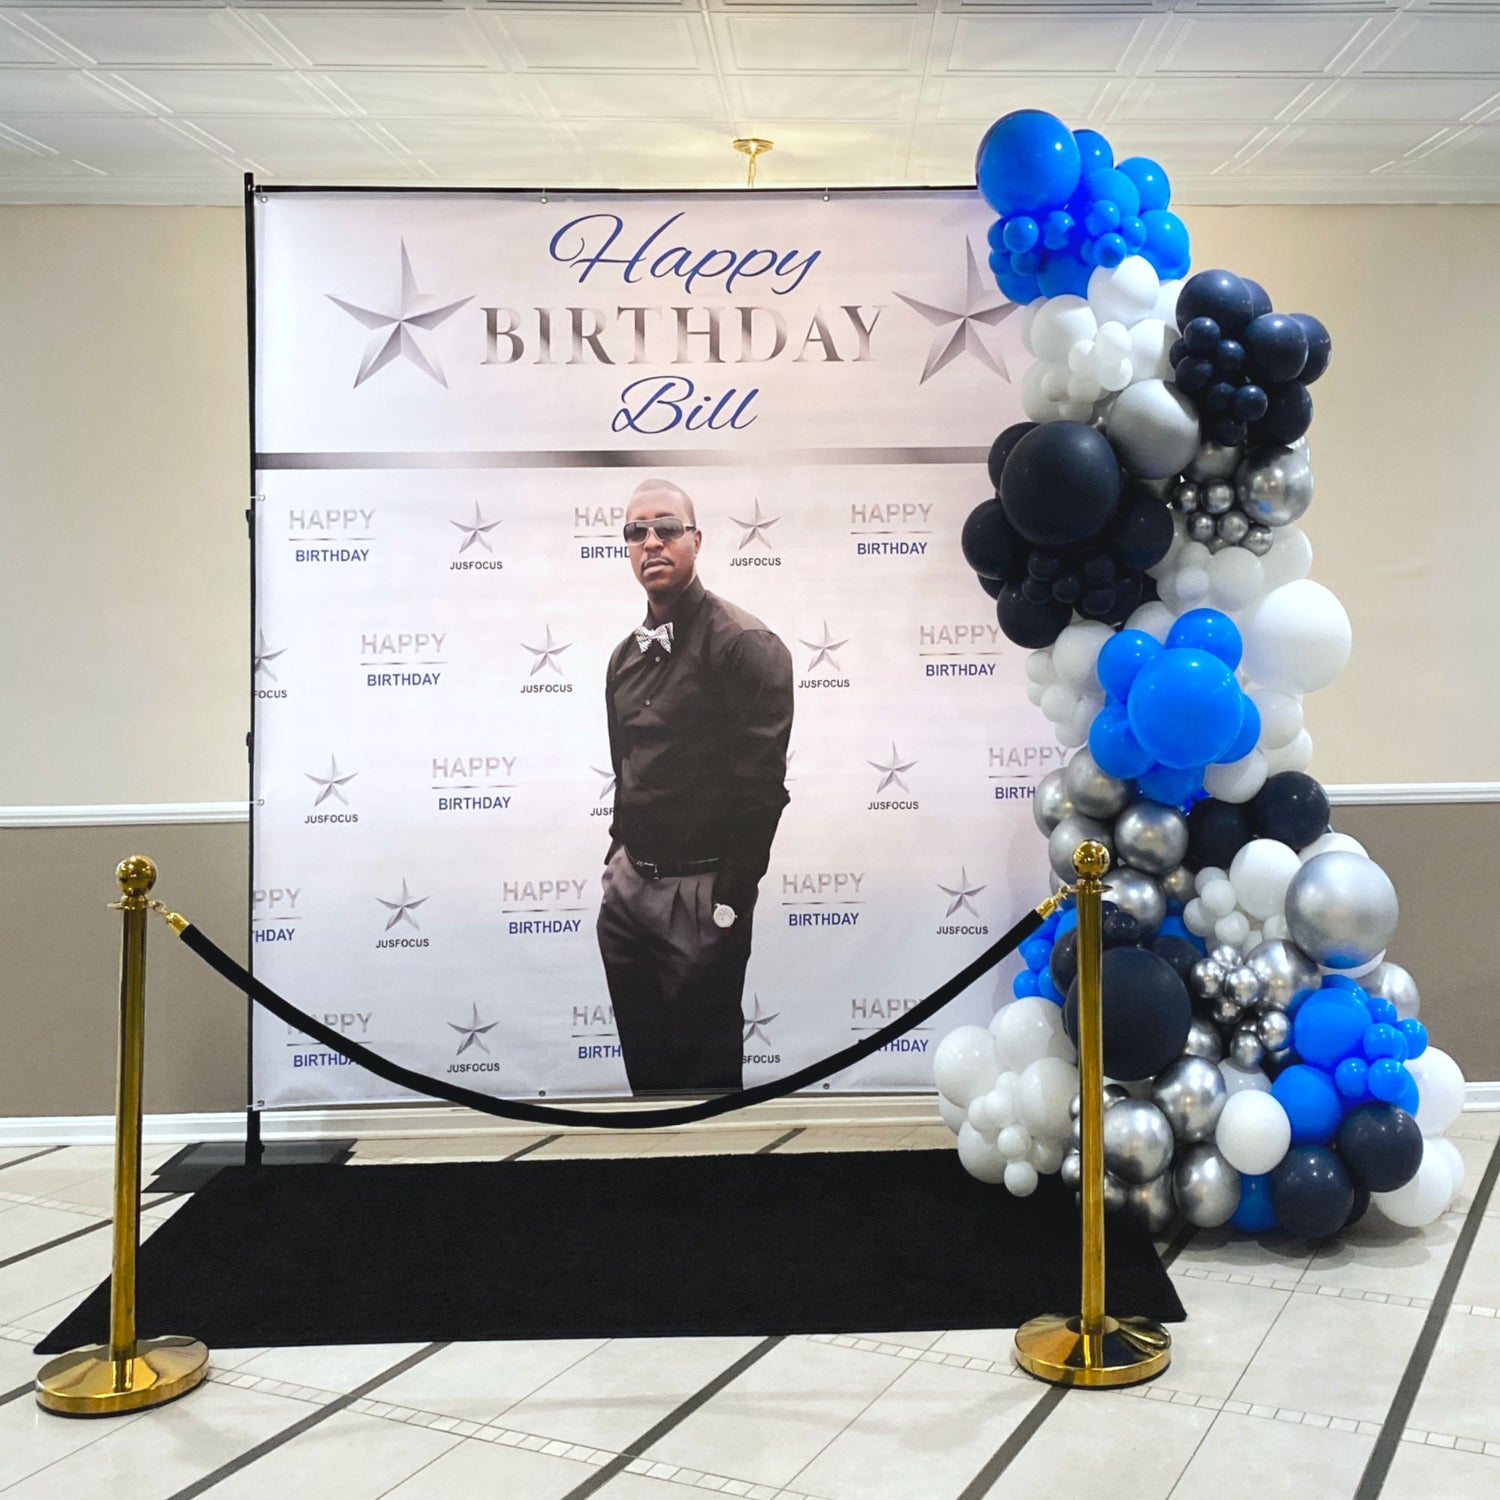 Balloon garland and custom backdrop with the colors navy blue, royal blue, silver and white